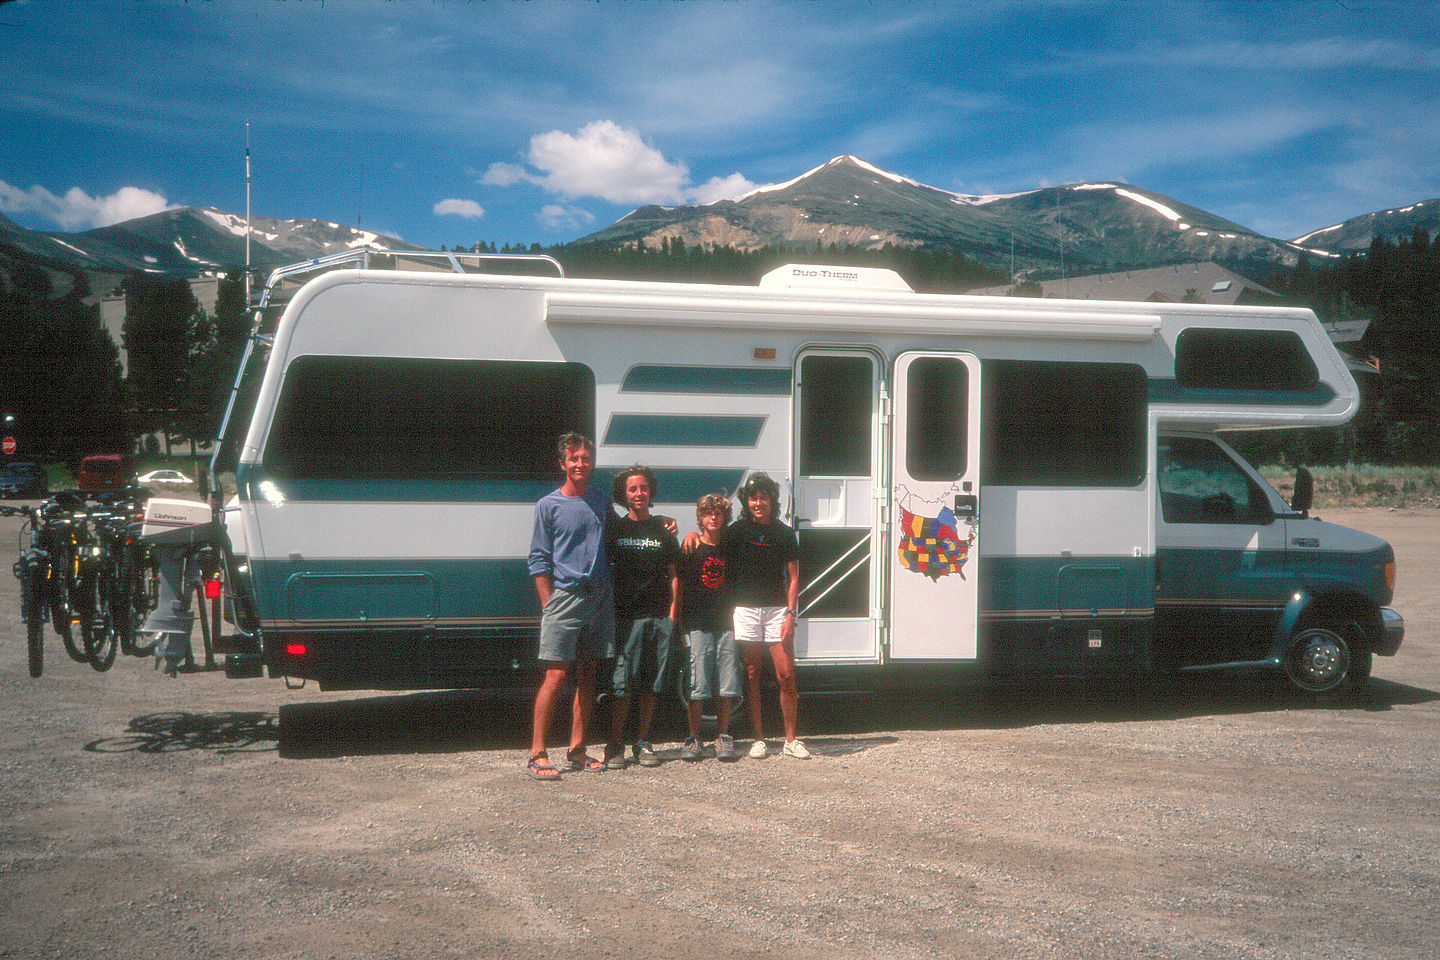 Family RV shot with snowcapped mountains